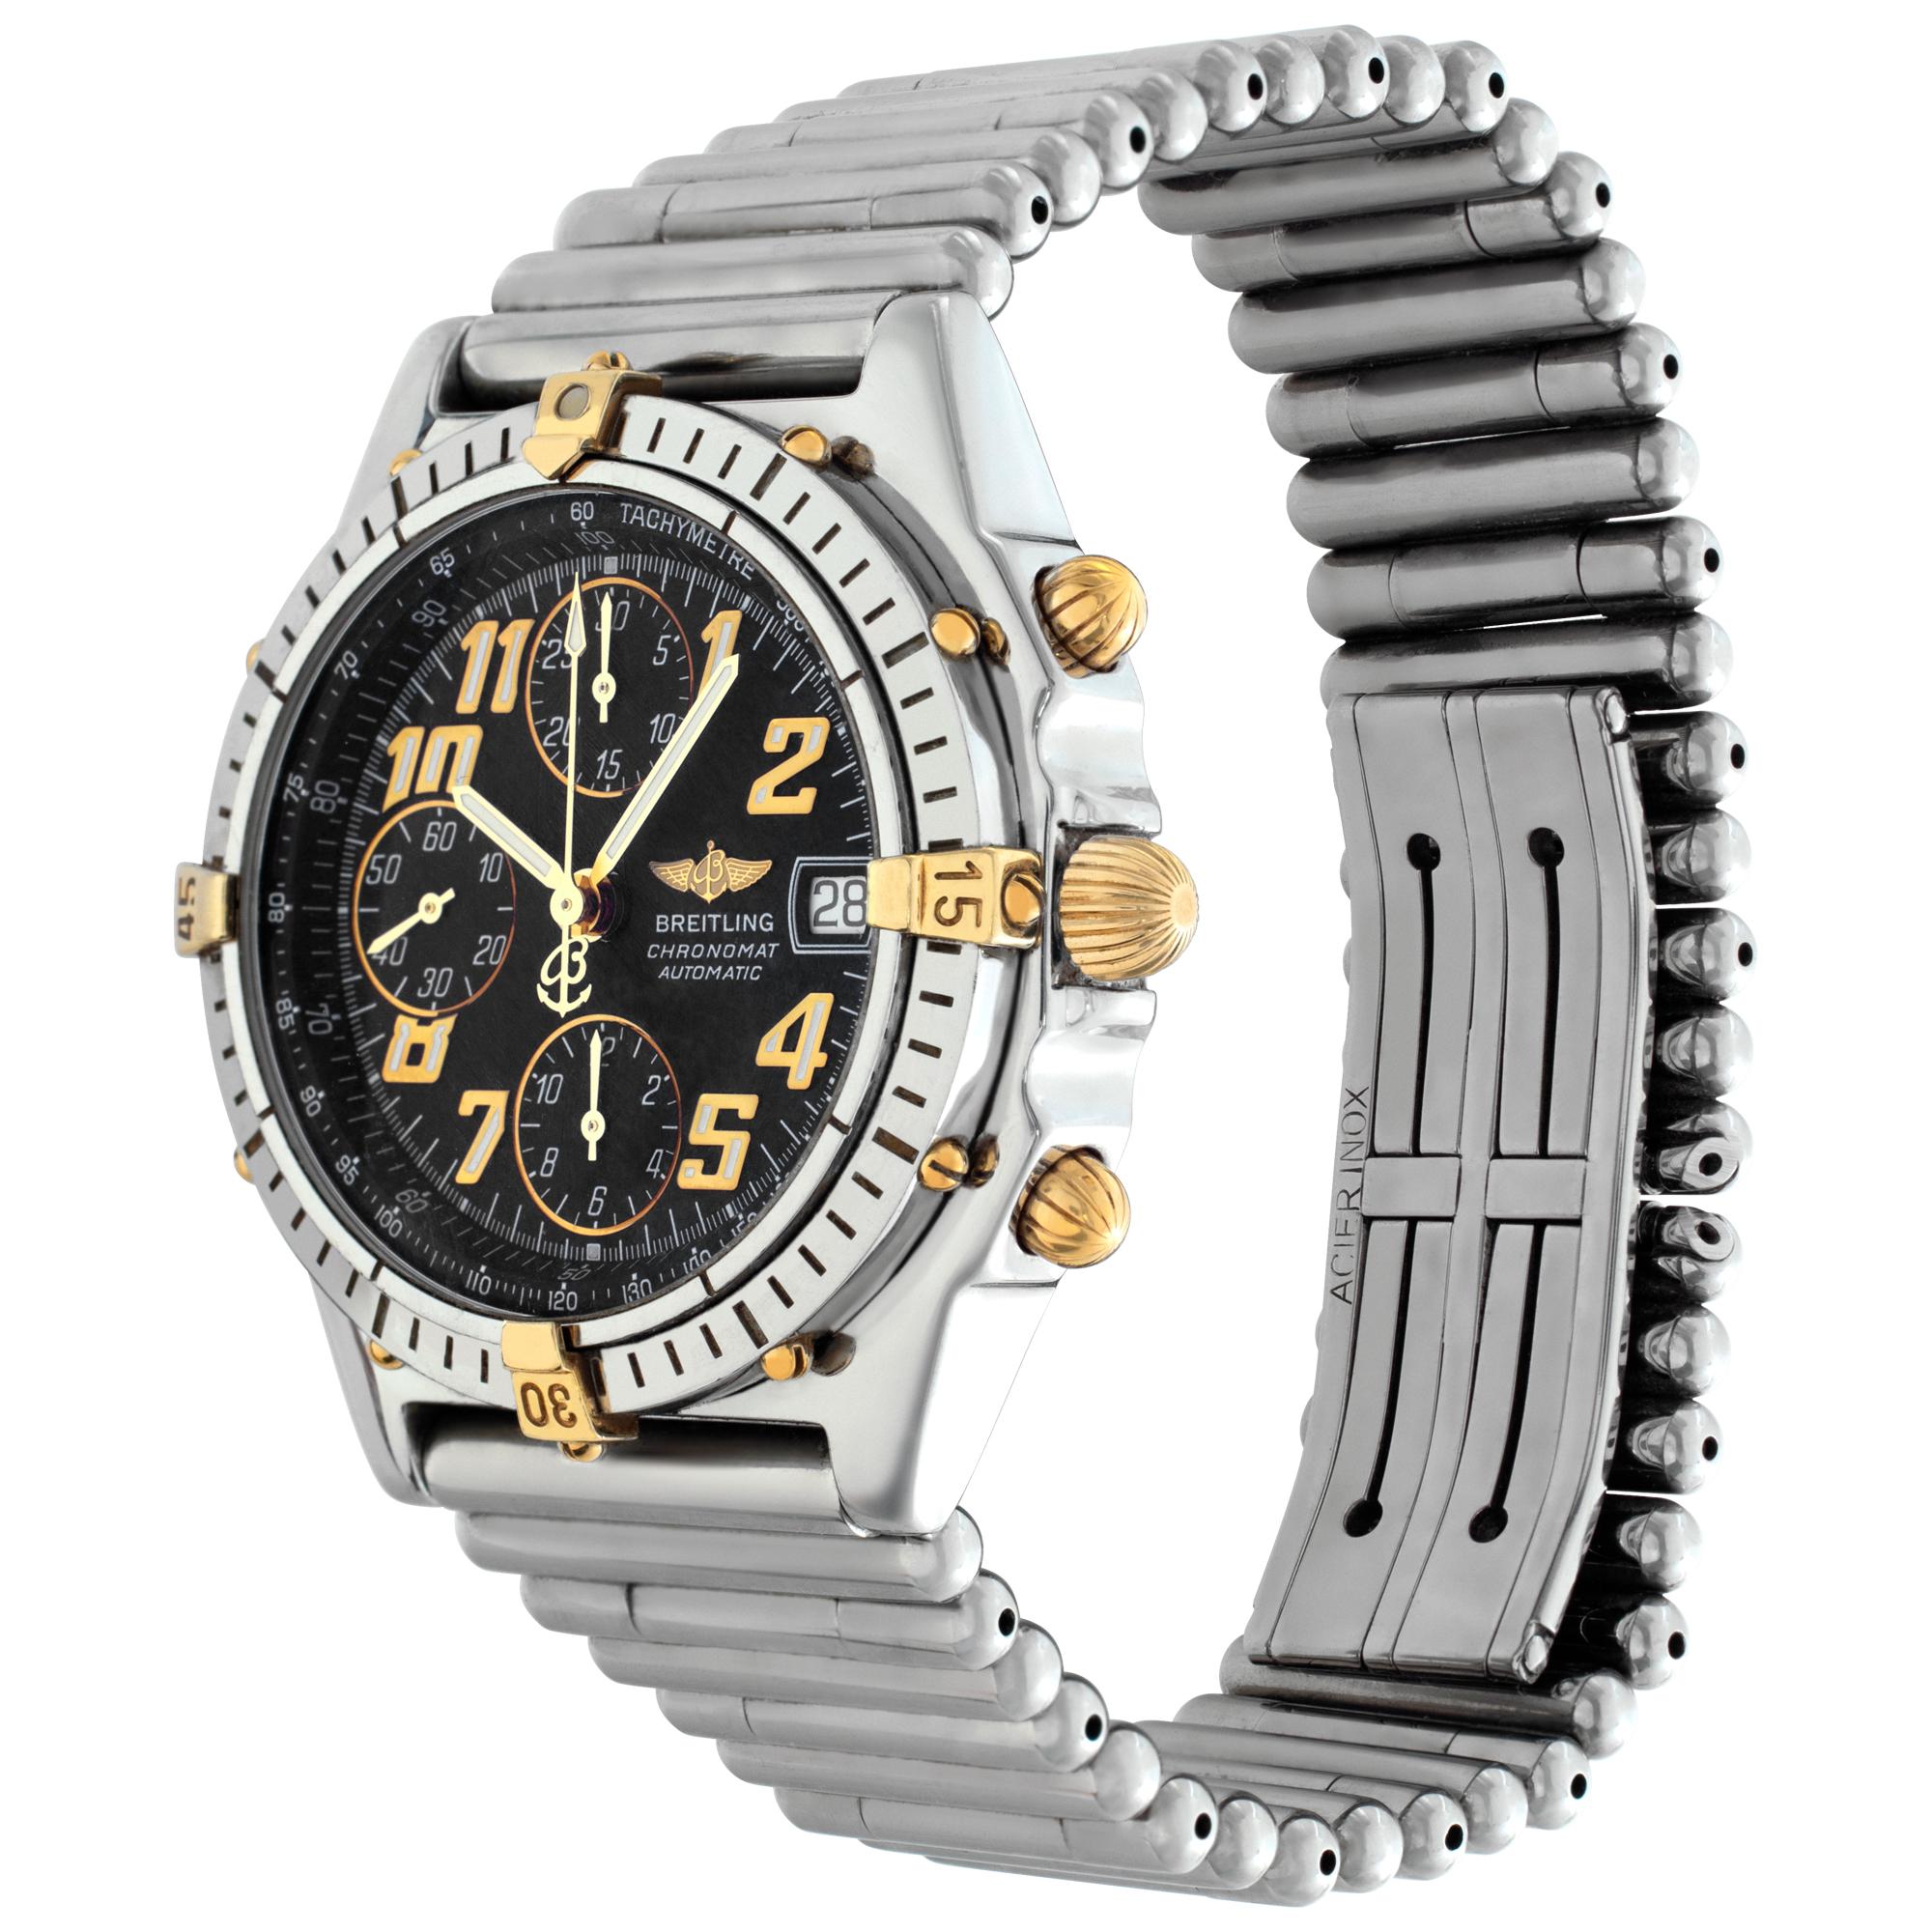 Breitling Chronomat in stainless steel with gold riders, chrono pushers and crown with black dial set with Arabic hour markers. Auto w/ sweep seconds, date and chronograph. 38 mm case size. With box and papers. Ref B1350.1. Circa 2020. Fine